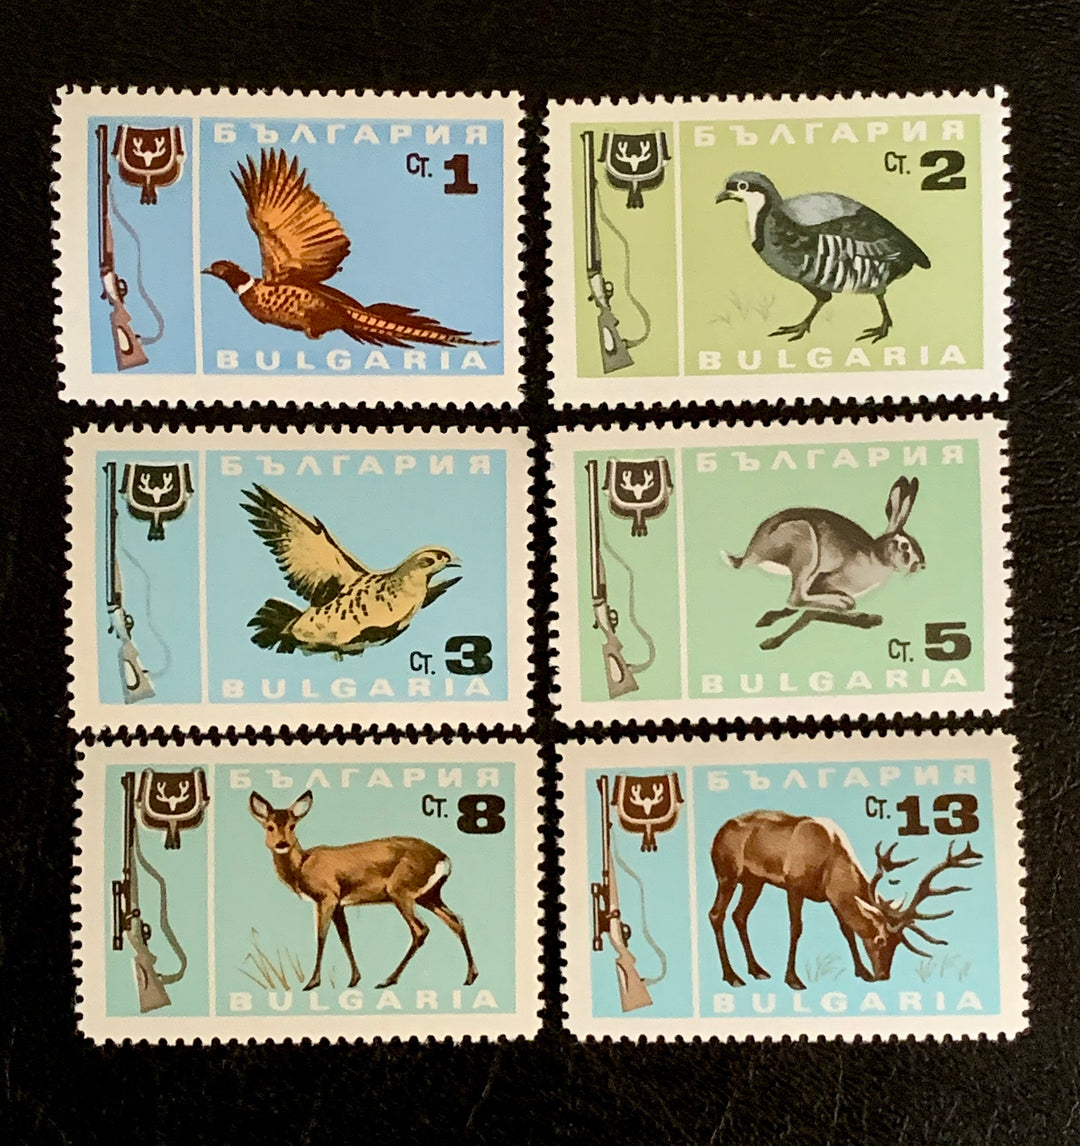 Bulgaria - Original Vintage Postage Stamps - 1967 - Hunting - for the collector, artist or crafter